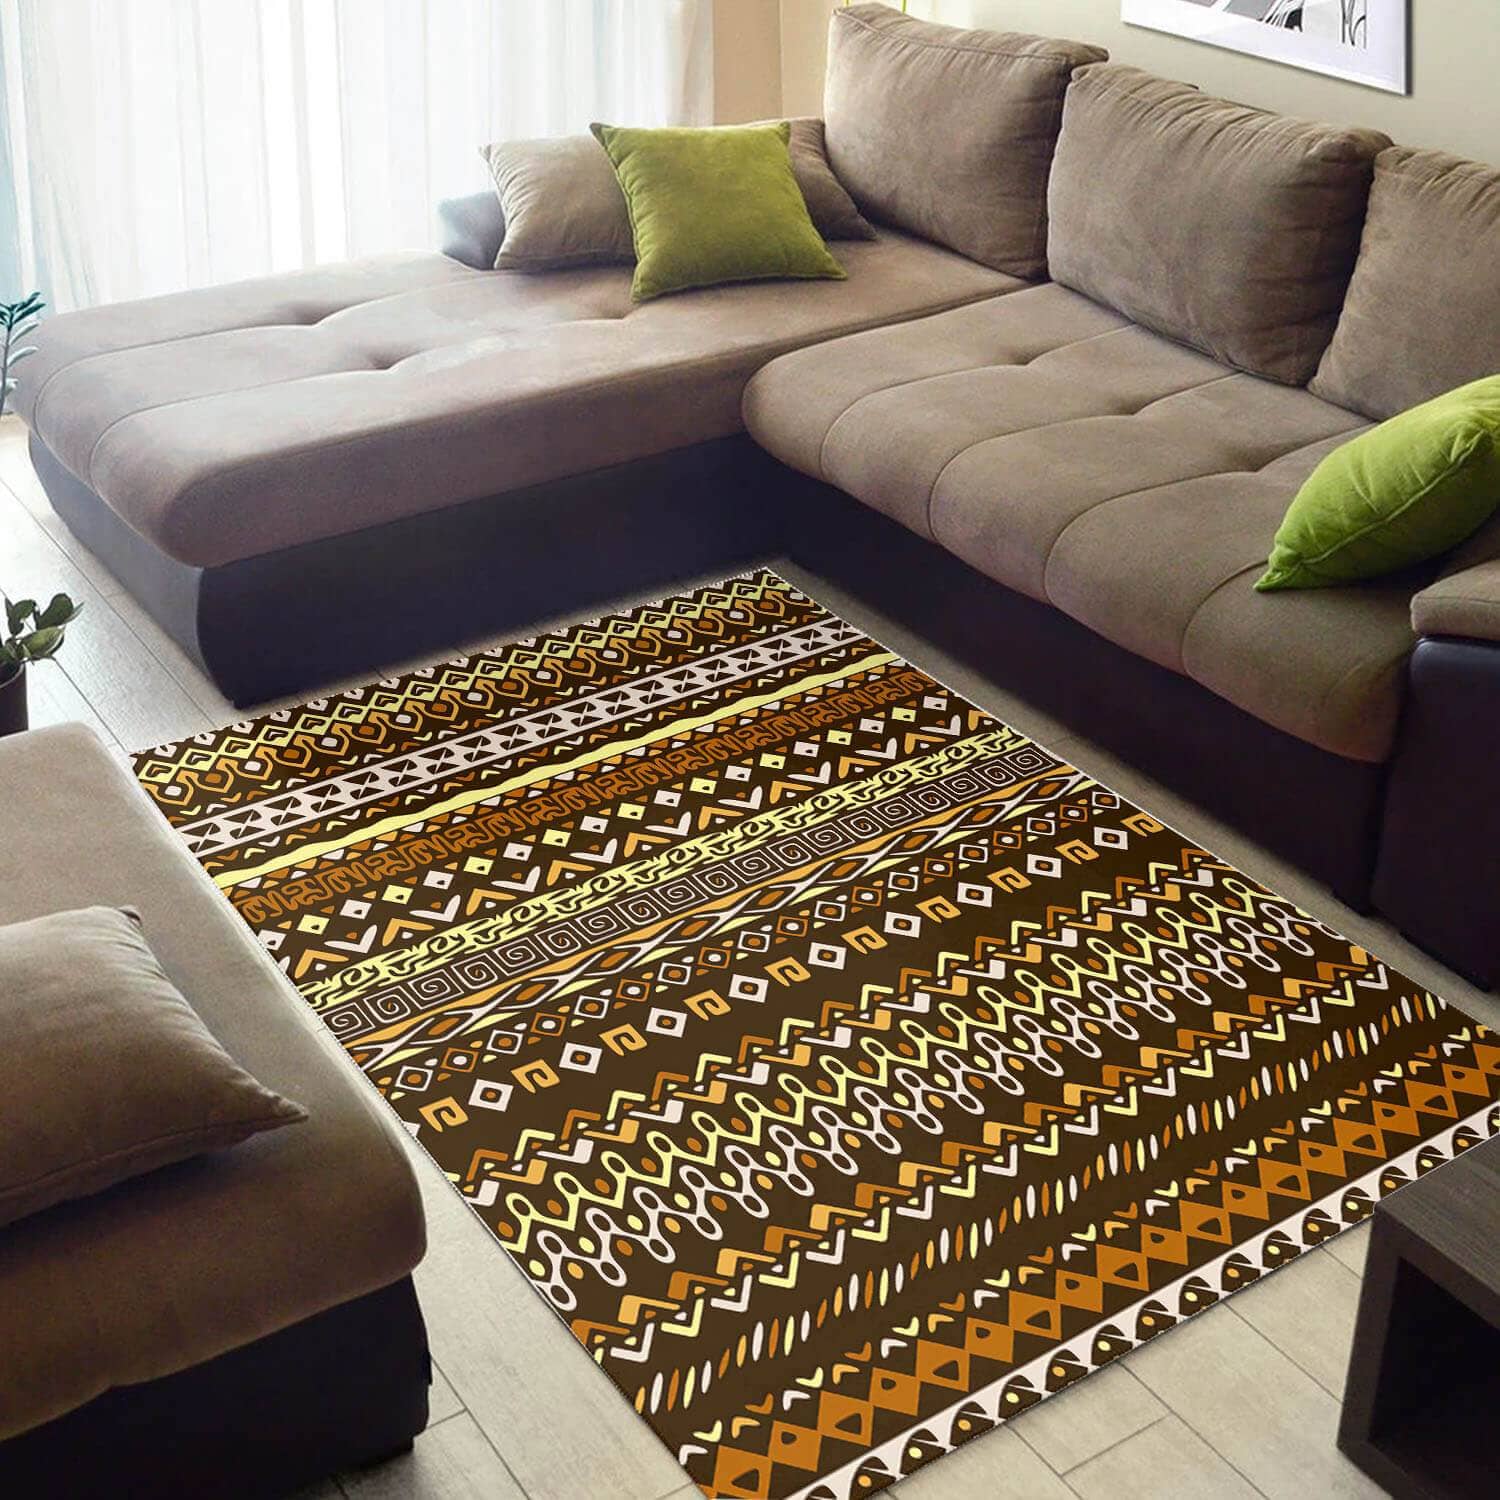 Cool African Colorful Afrocentric Pattern Art Large Living Room Rug